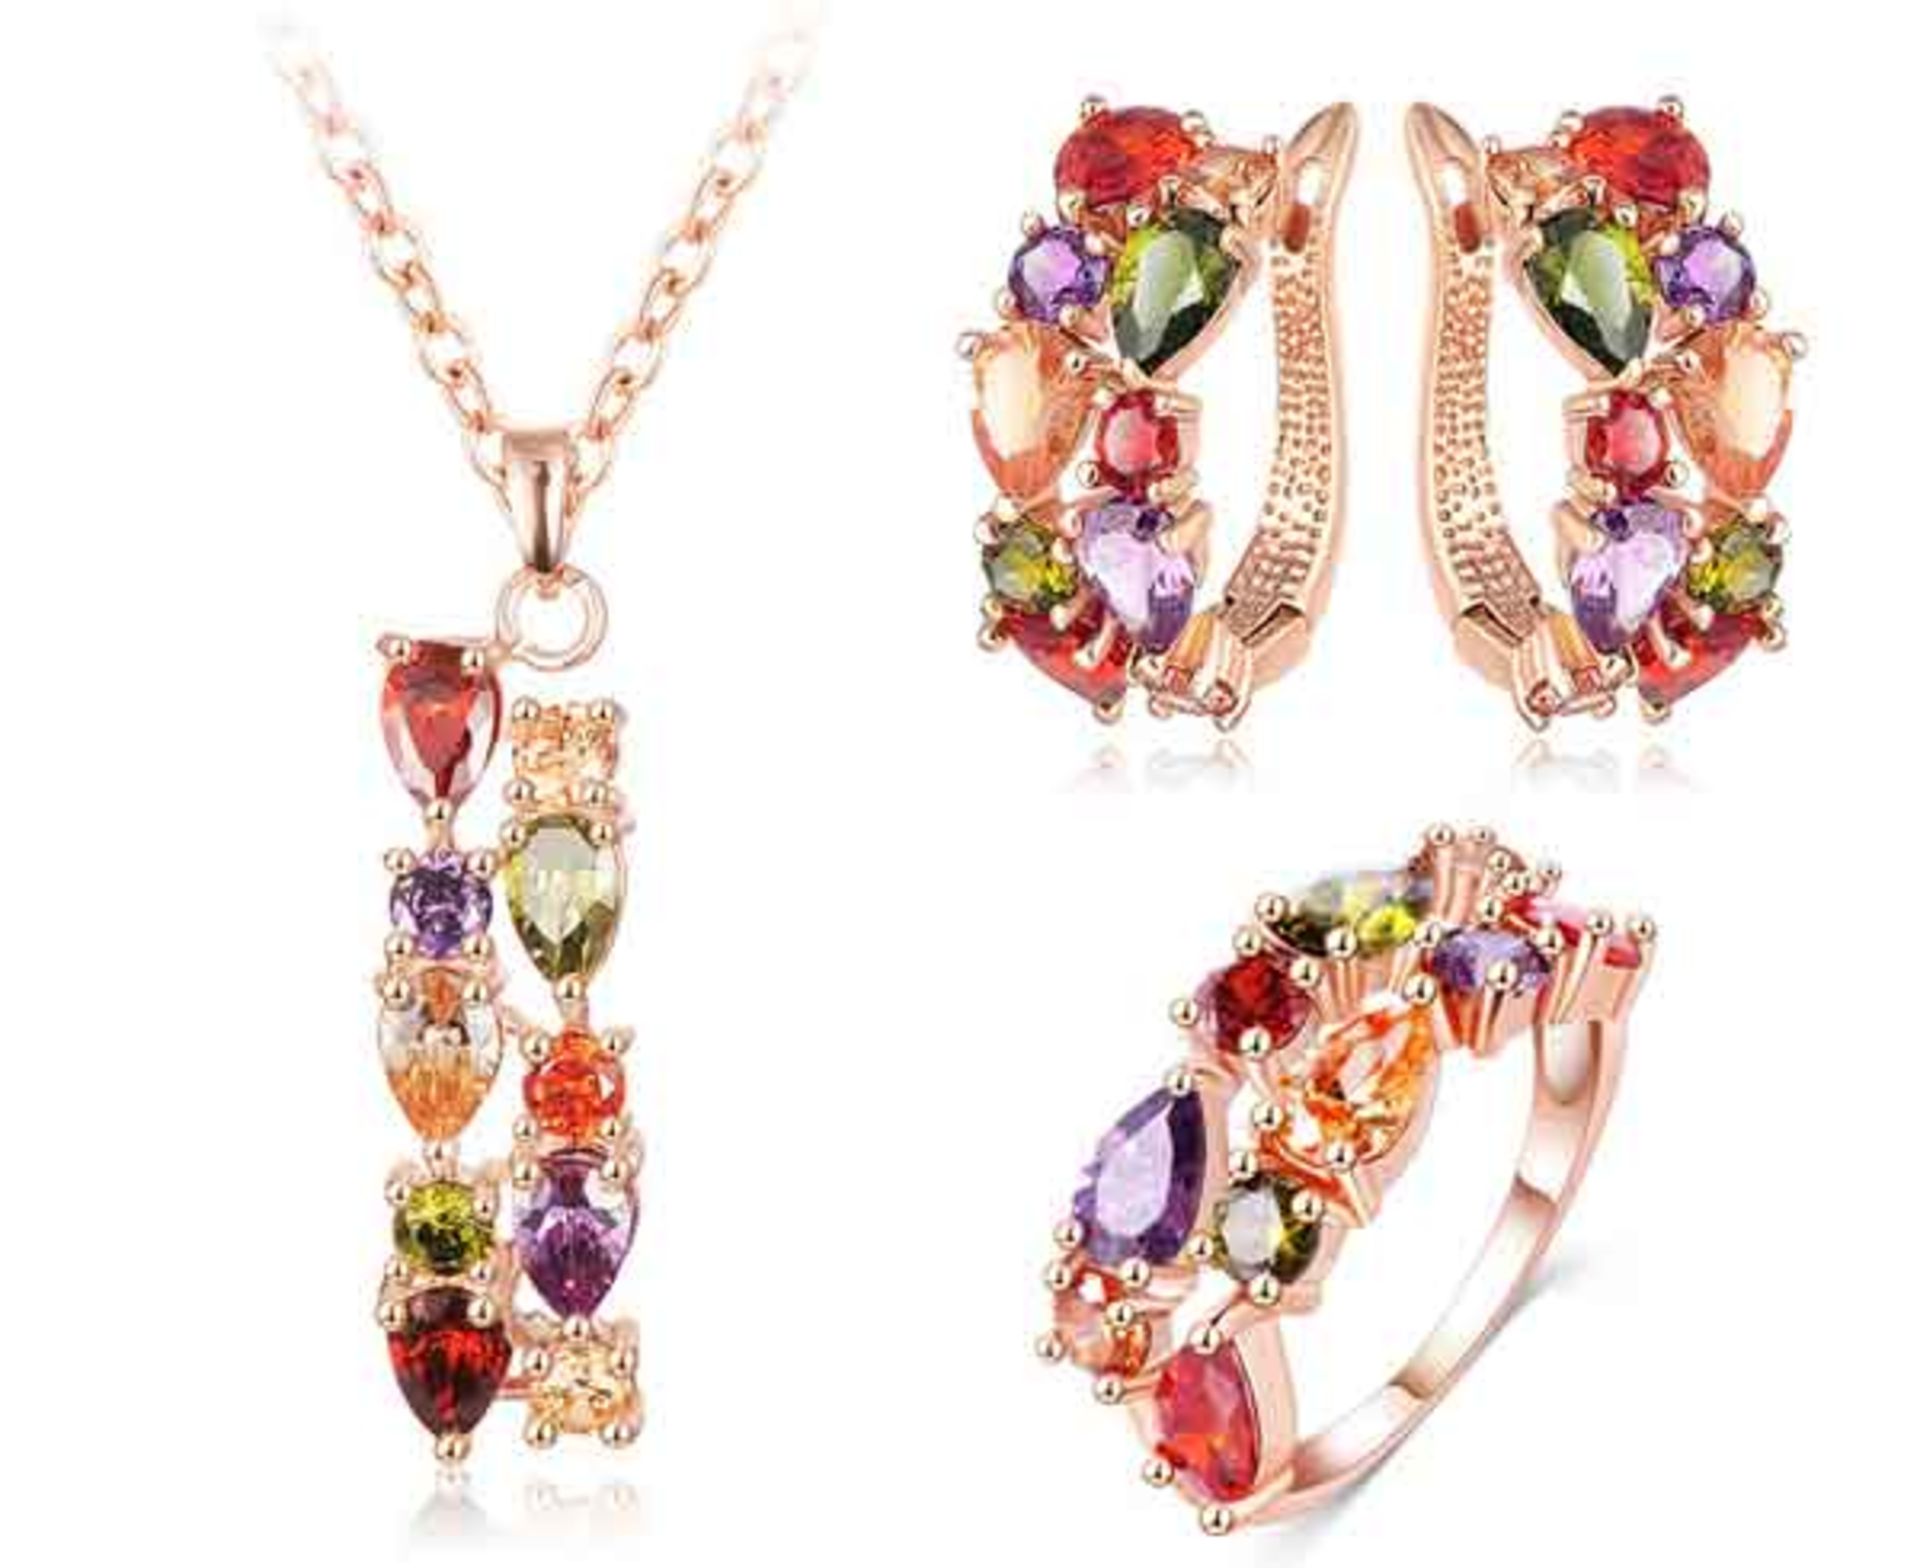 V Brand New Rose Gold Plated Multi Stone Necklace Earing and Ring Set X 2 YOUR BID PRICE TO BE